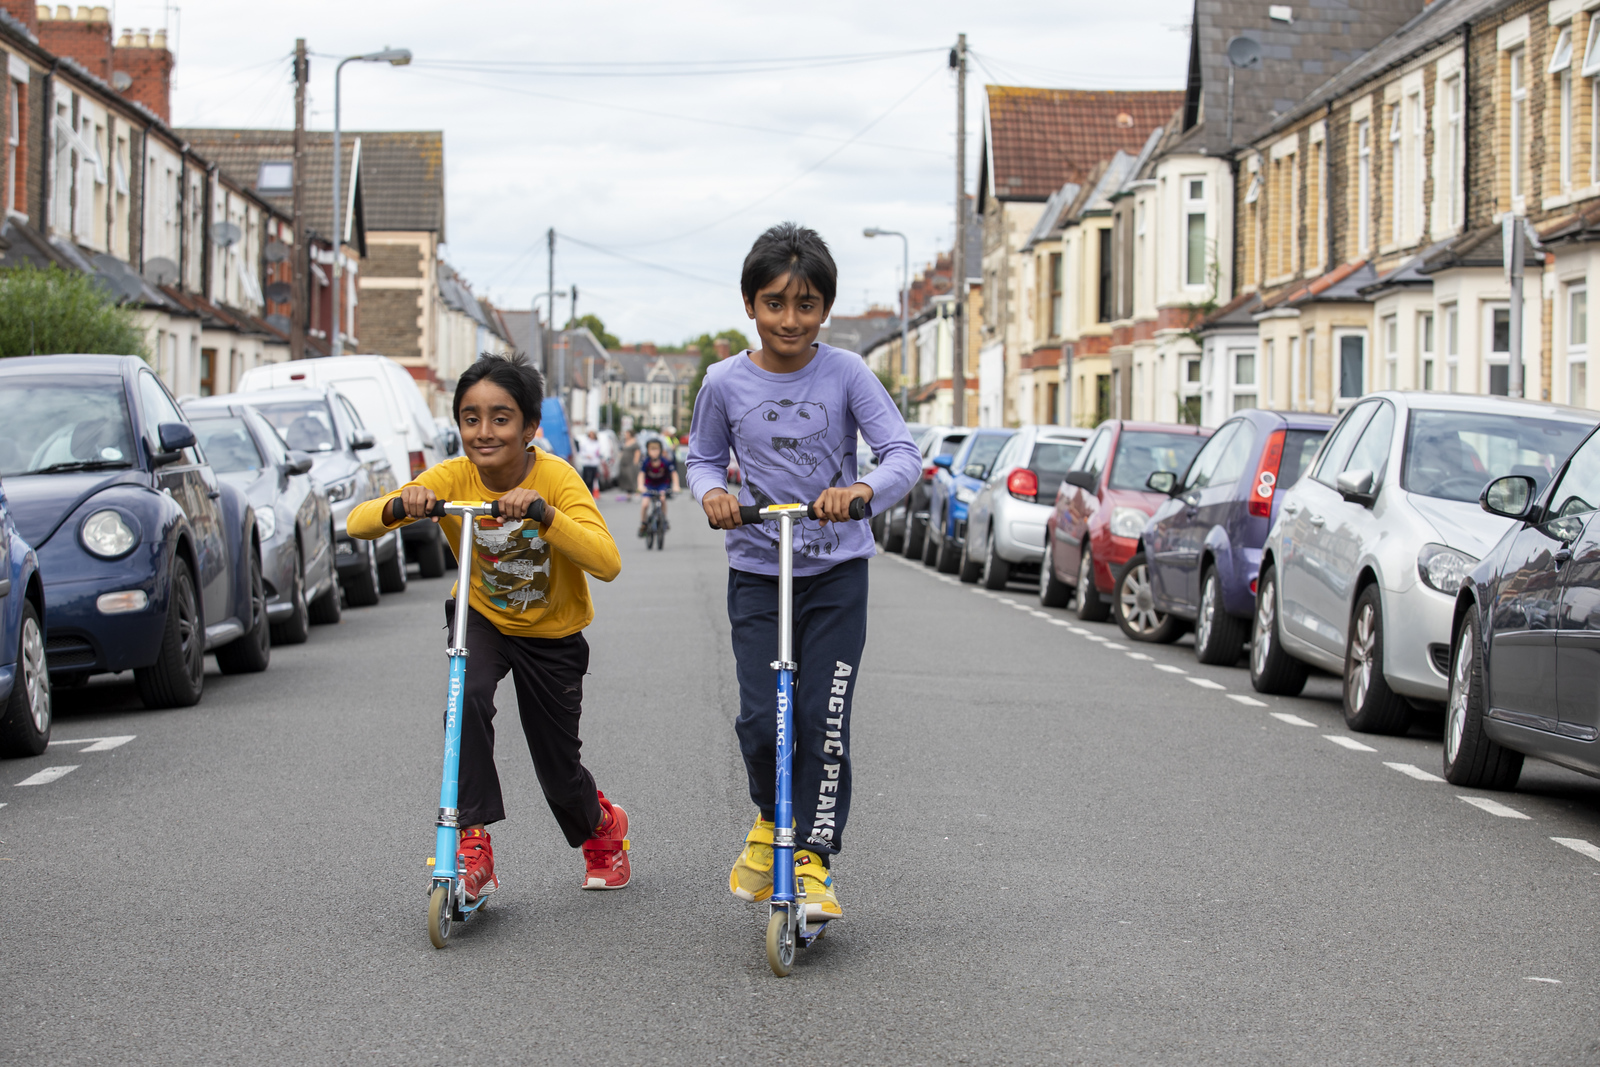 Two young children scootering down a street that is closed to traffic